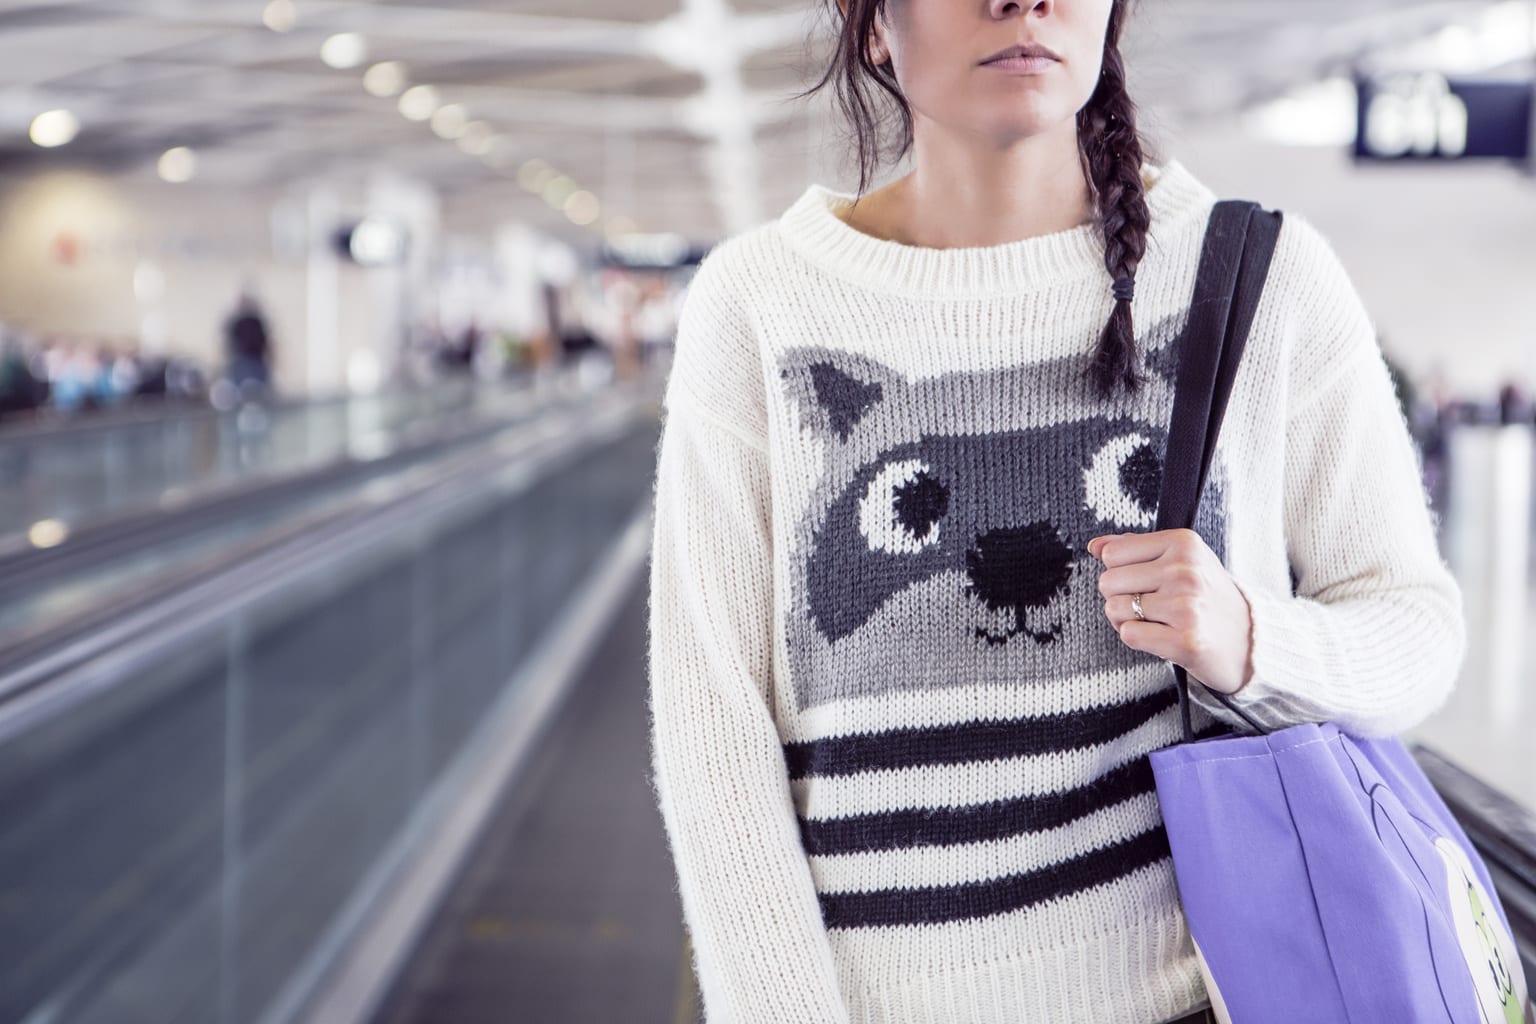 Woman at the airport on a moving sidewalk wearing a raccoon sweater and carrying a purple tote bag